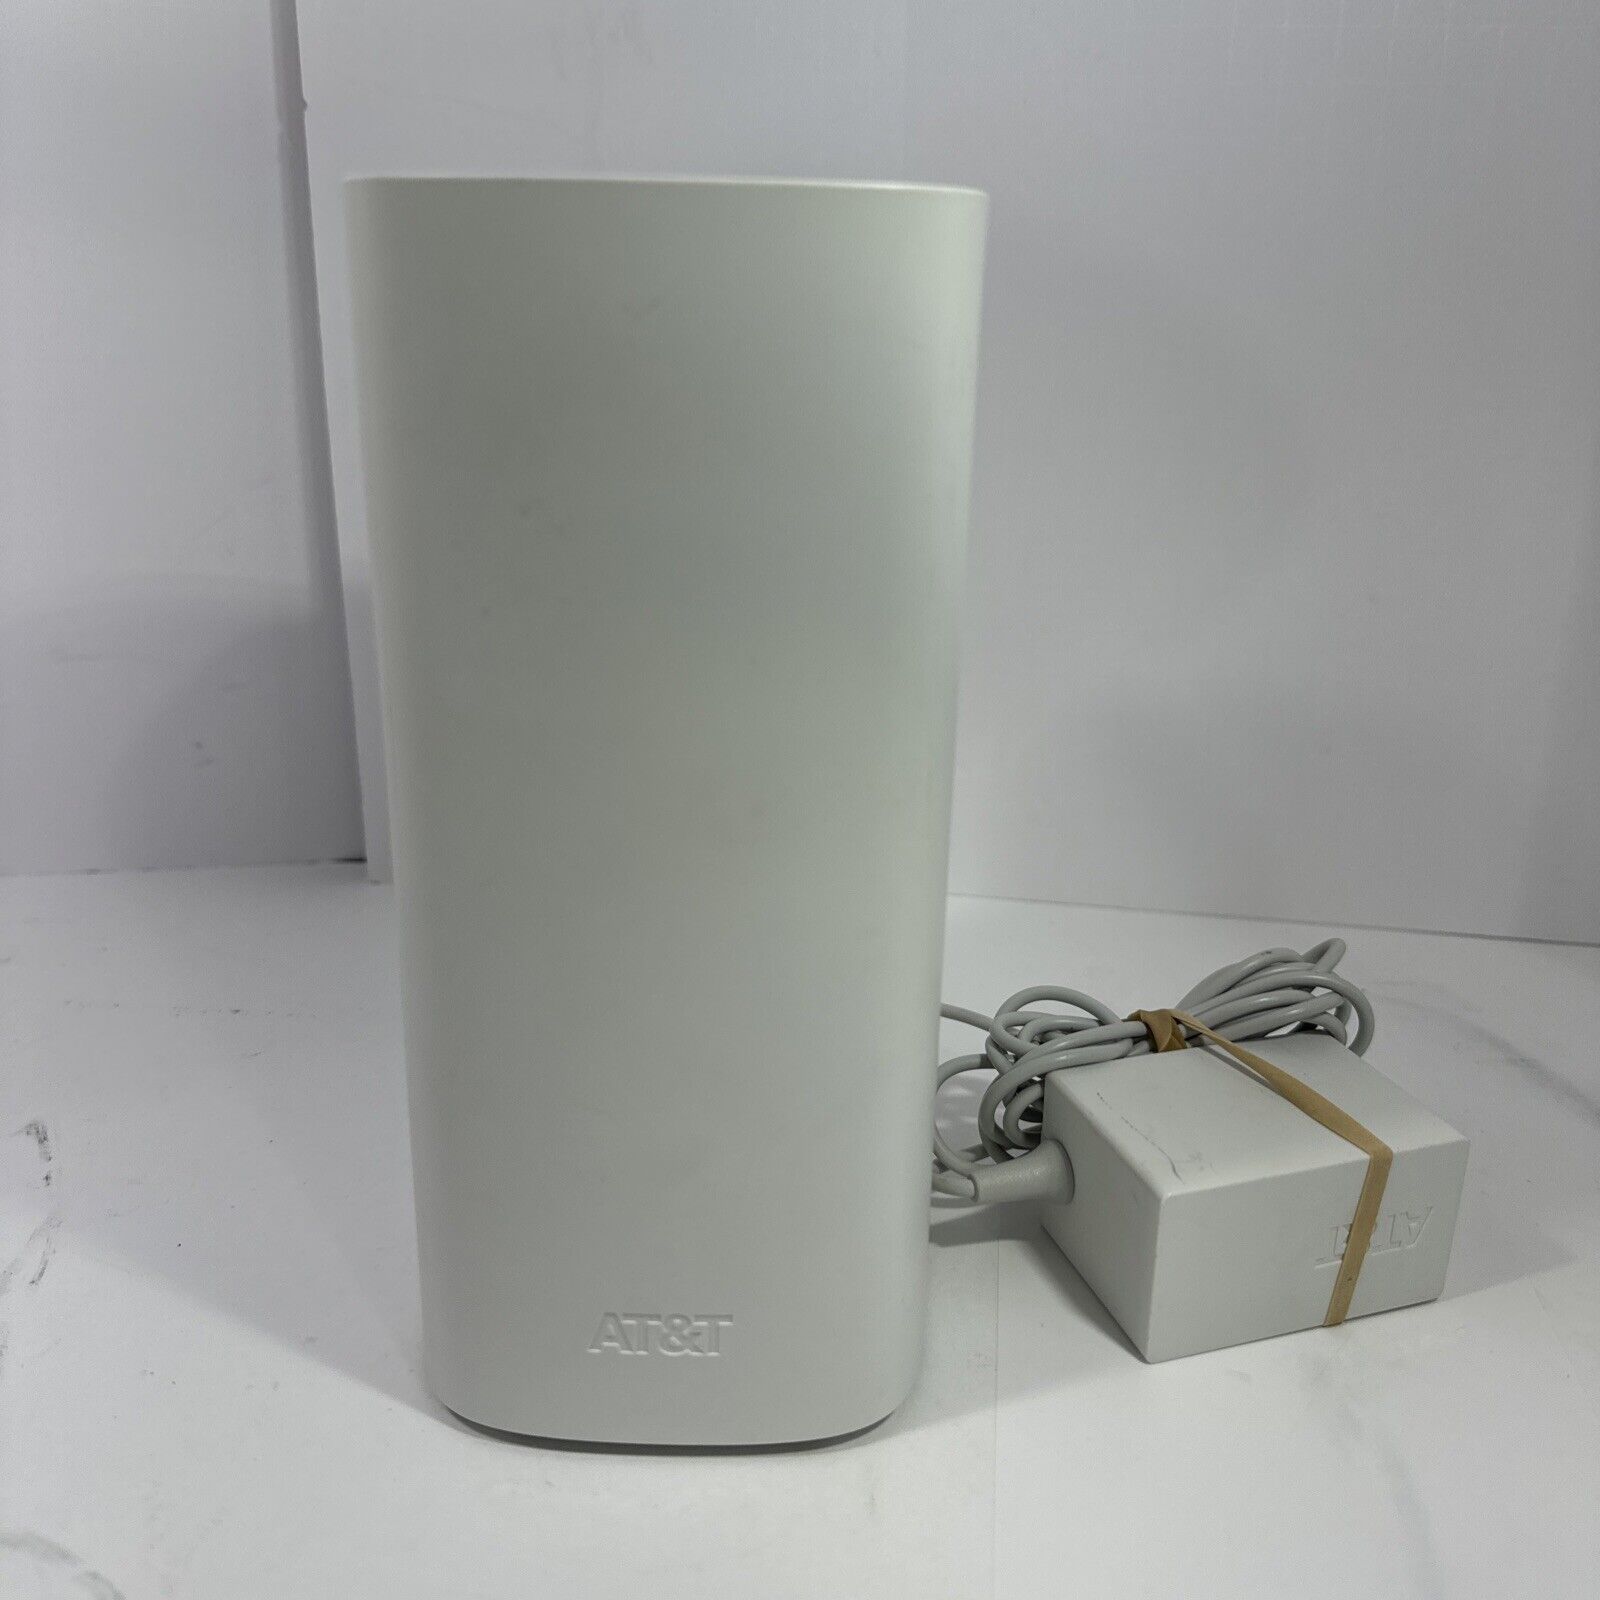 AT&T Air 4971 WiFi 6 Smart WiFi Extender Wireless Access Point WFEXT4971-41 READ